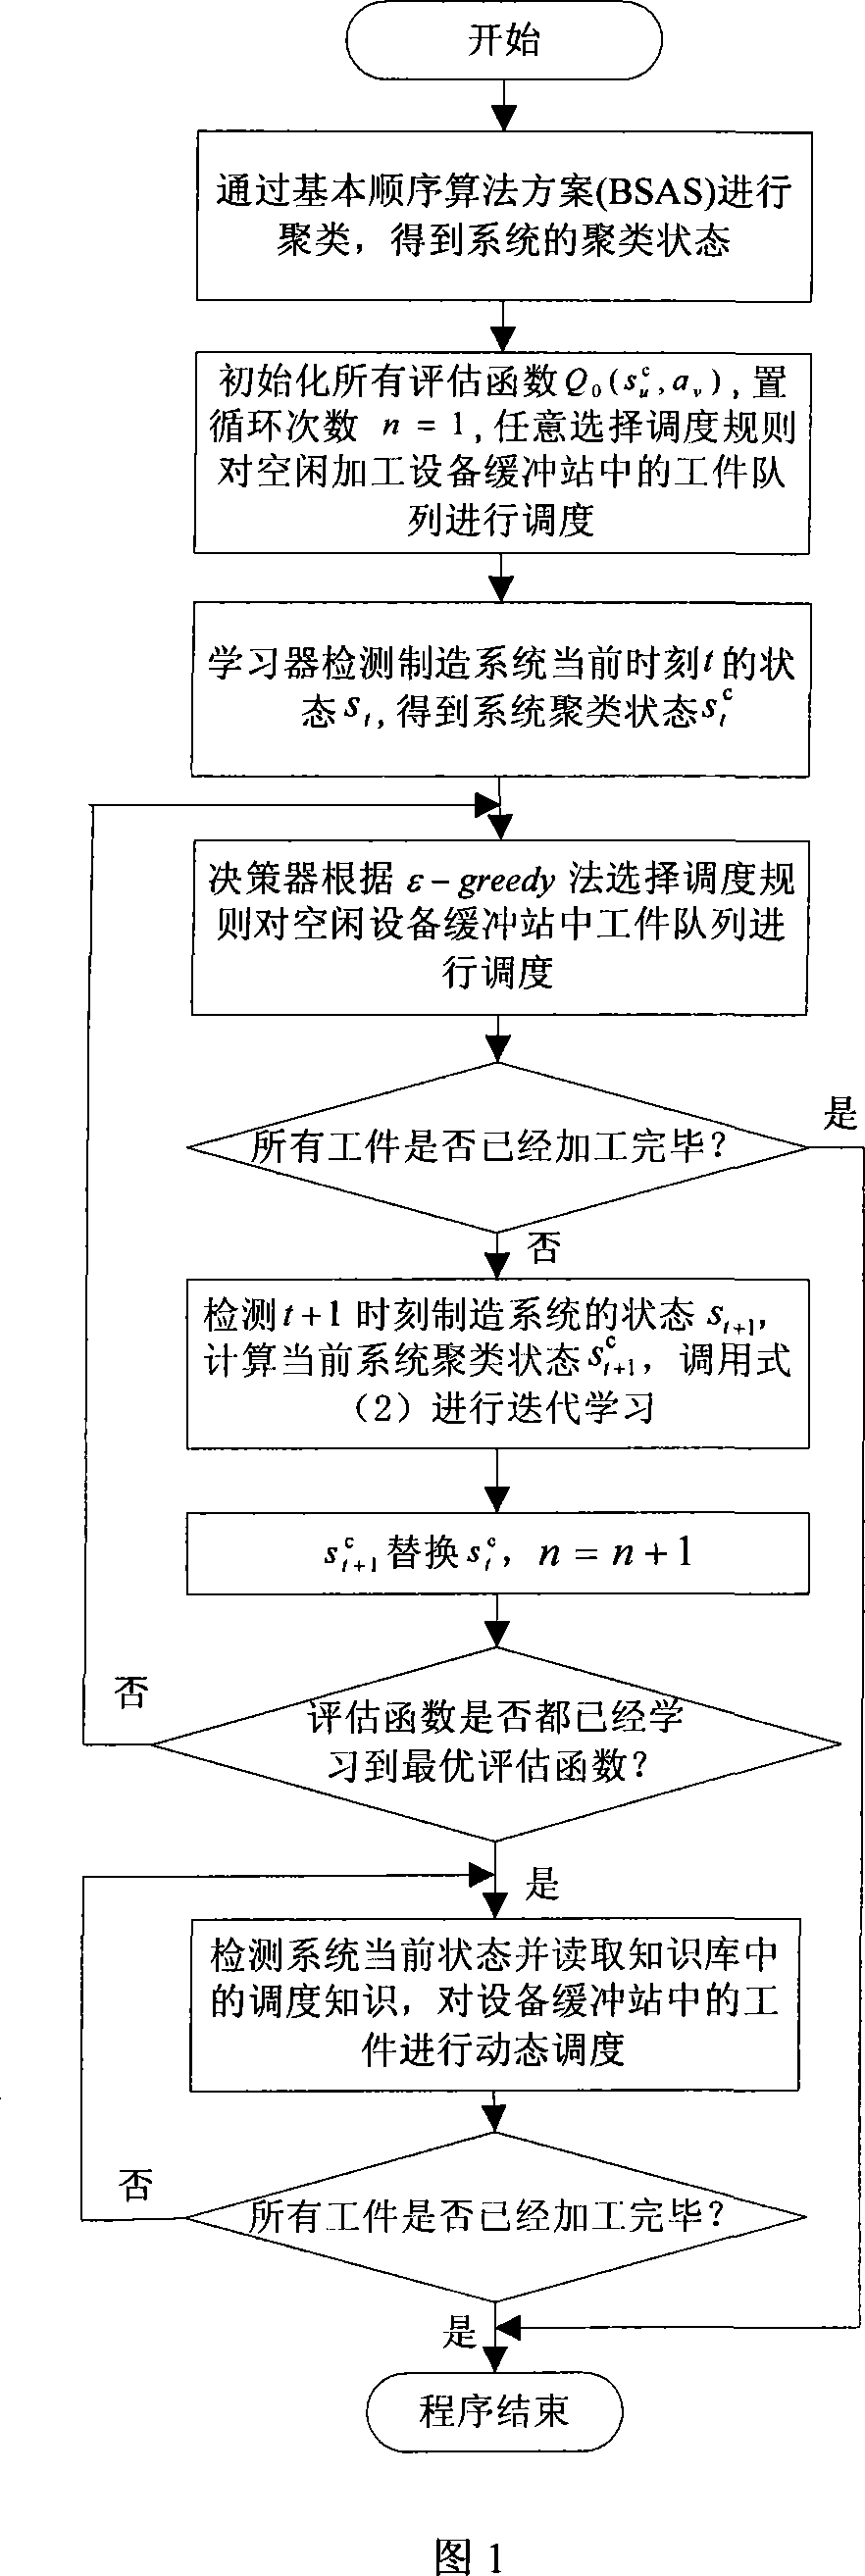 Self-adapting selection dynamic production scheduling control system accomplished through computer